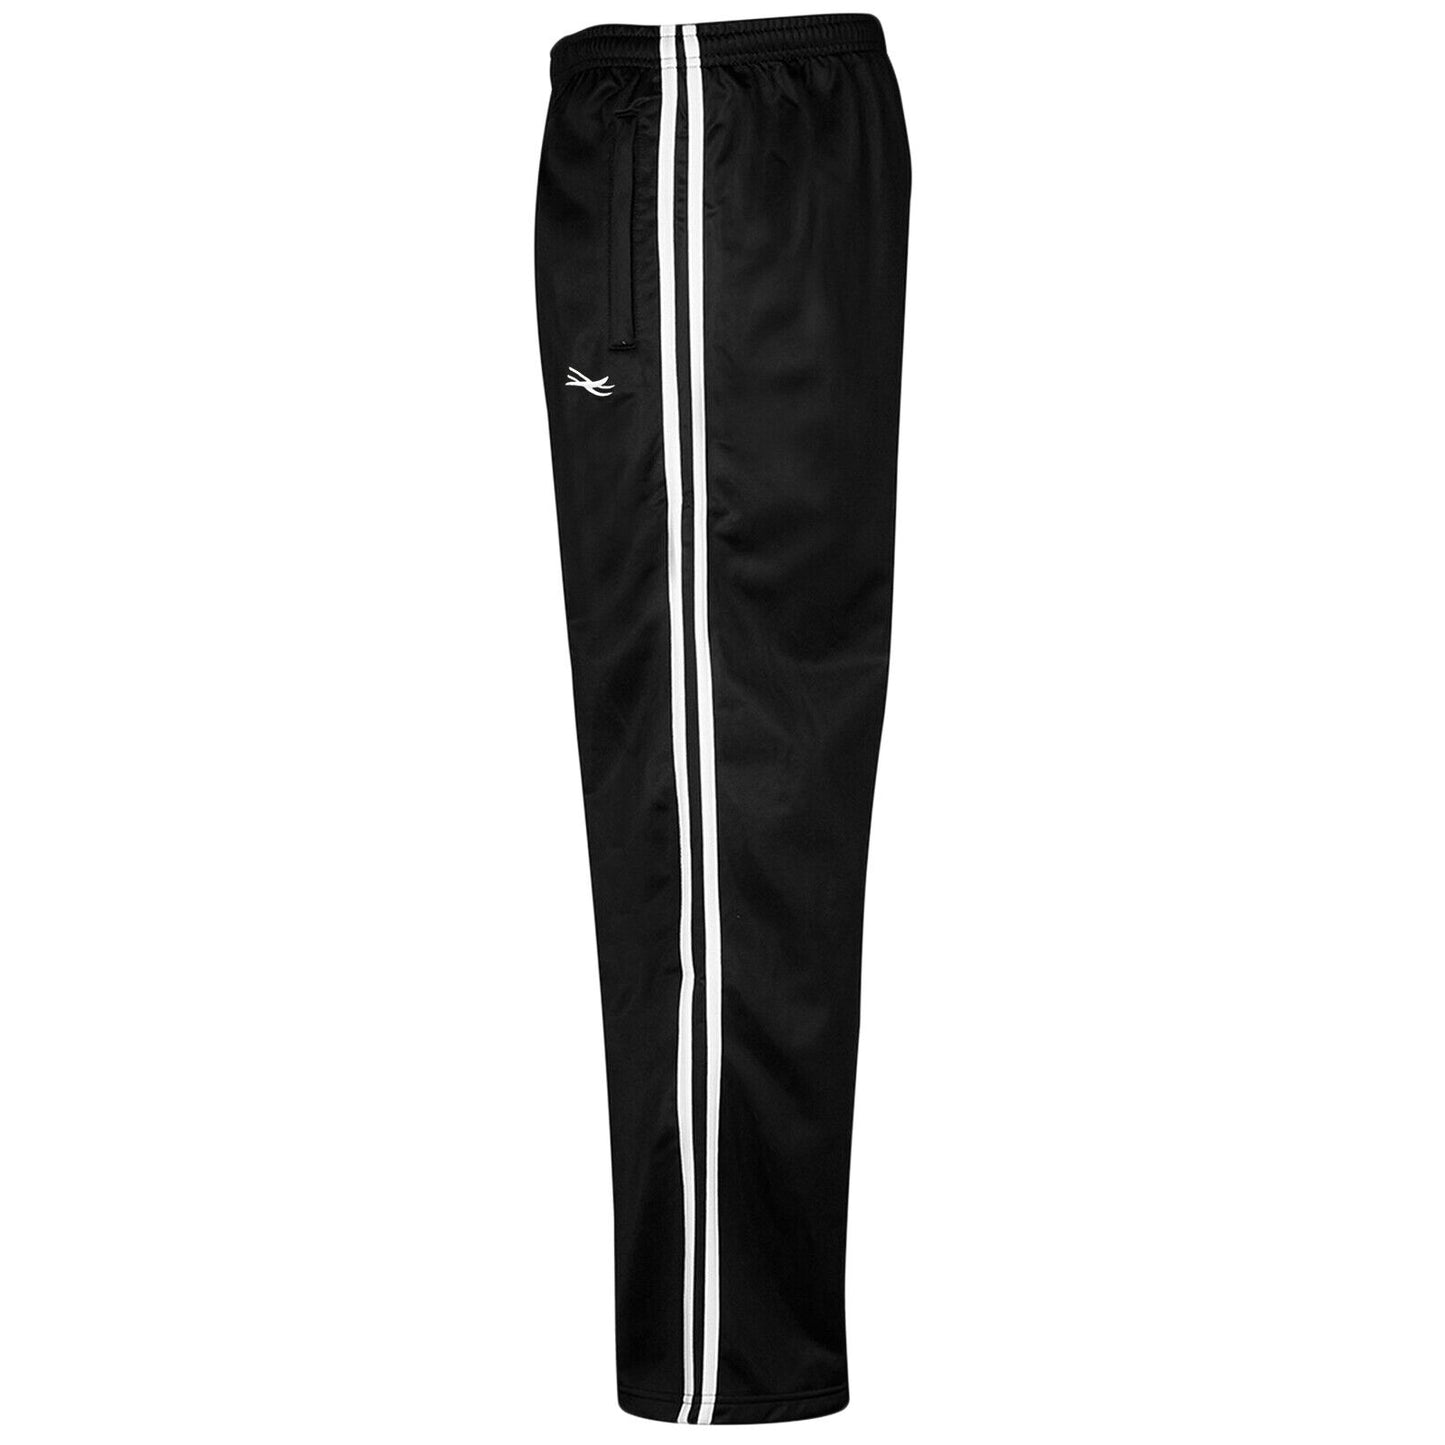 BOYS TRACKSUIT BOTTOMS SILKY JOGGERS JOGGING STRIPED SPORTS PANTS TROUSERS